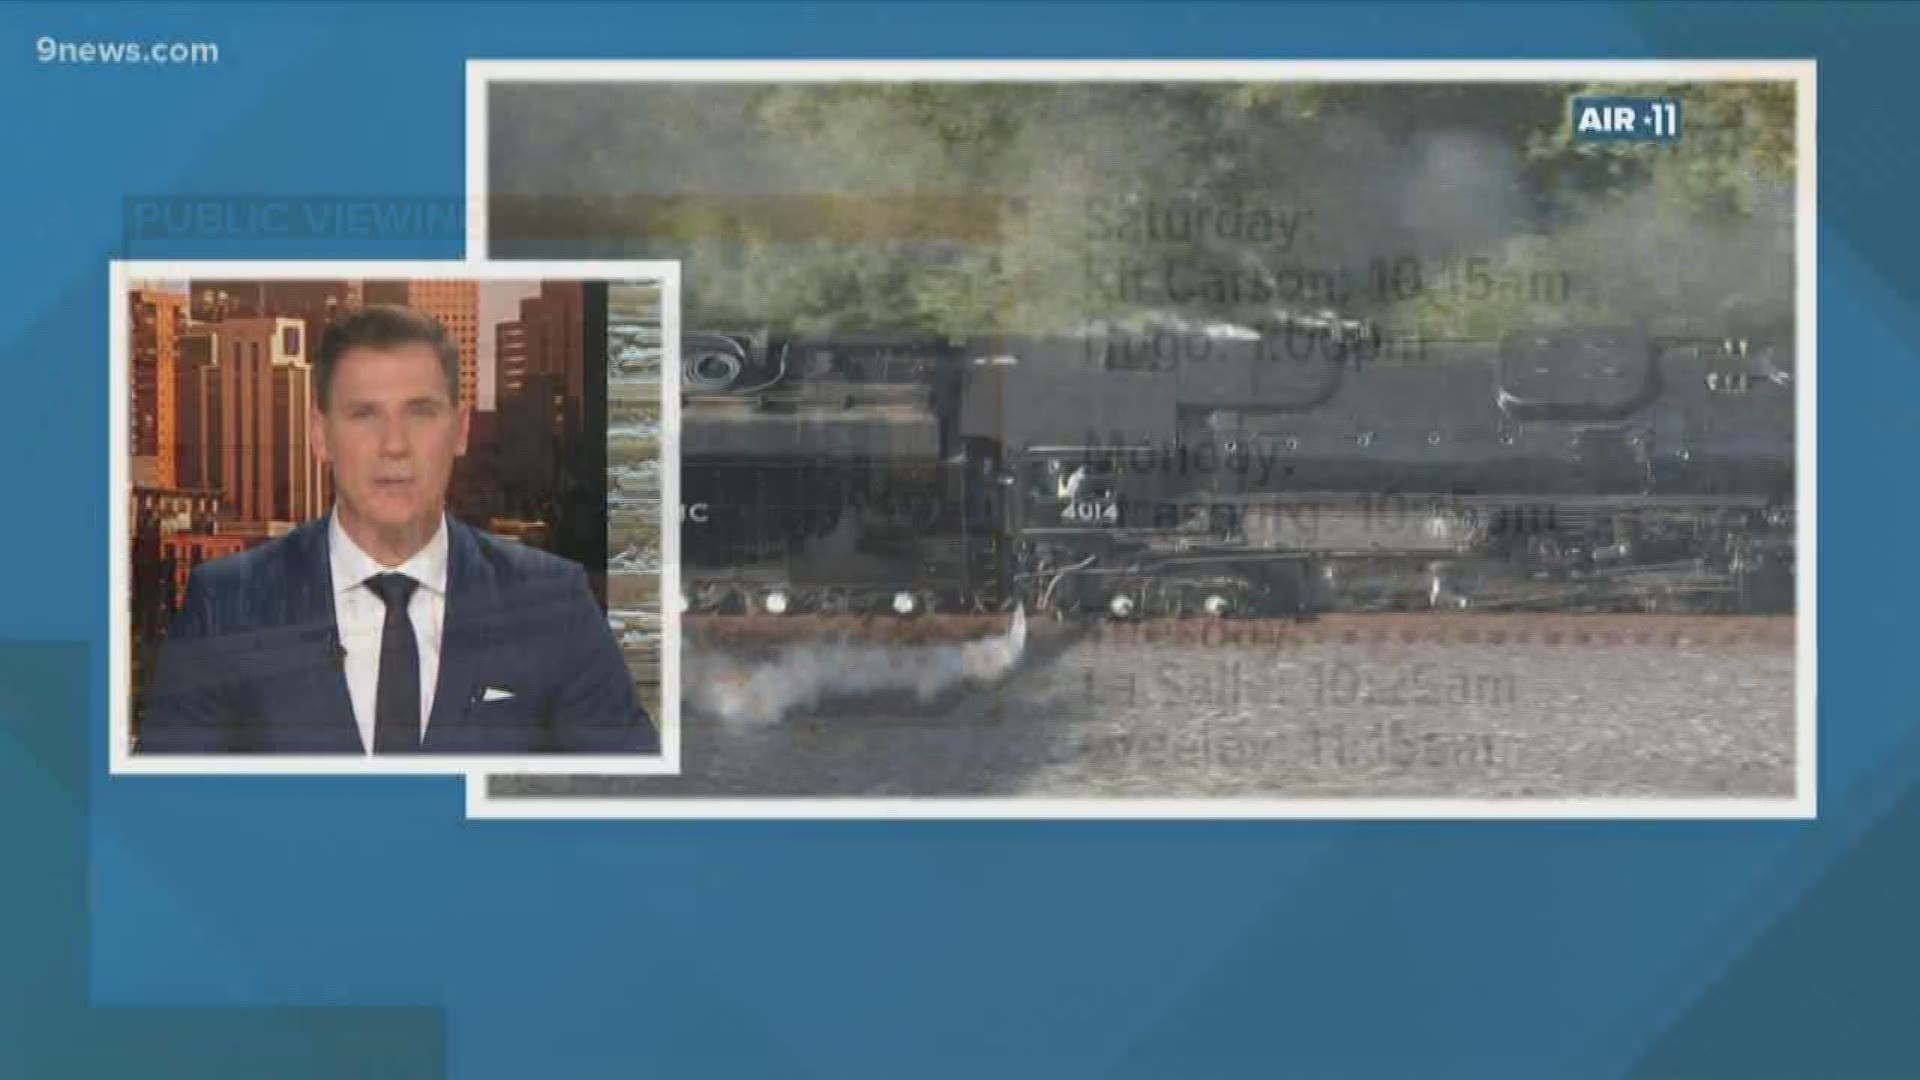 The Big Boy Steam Locomotive is riding the rails again for the 150th anniversary of the Transcontinental Railroad.